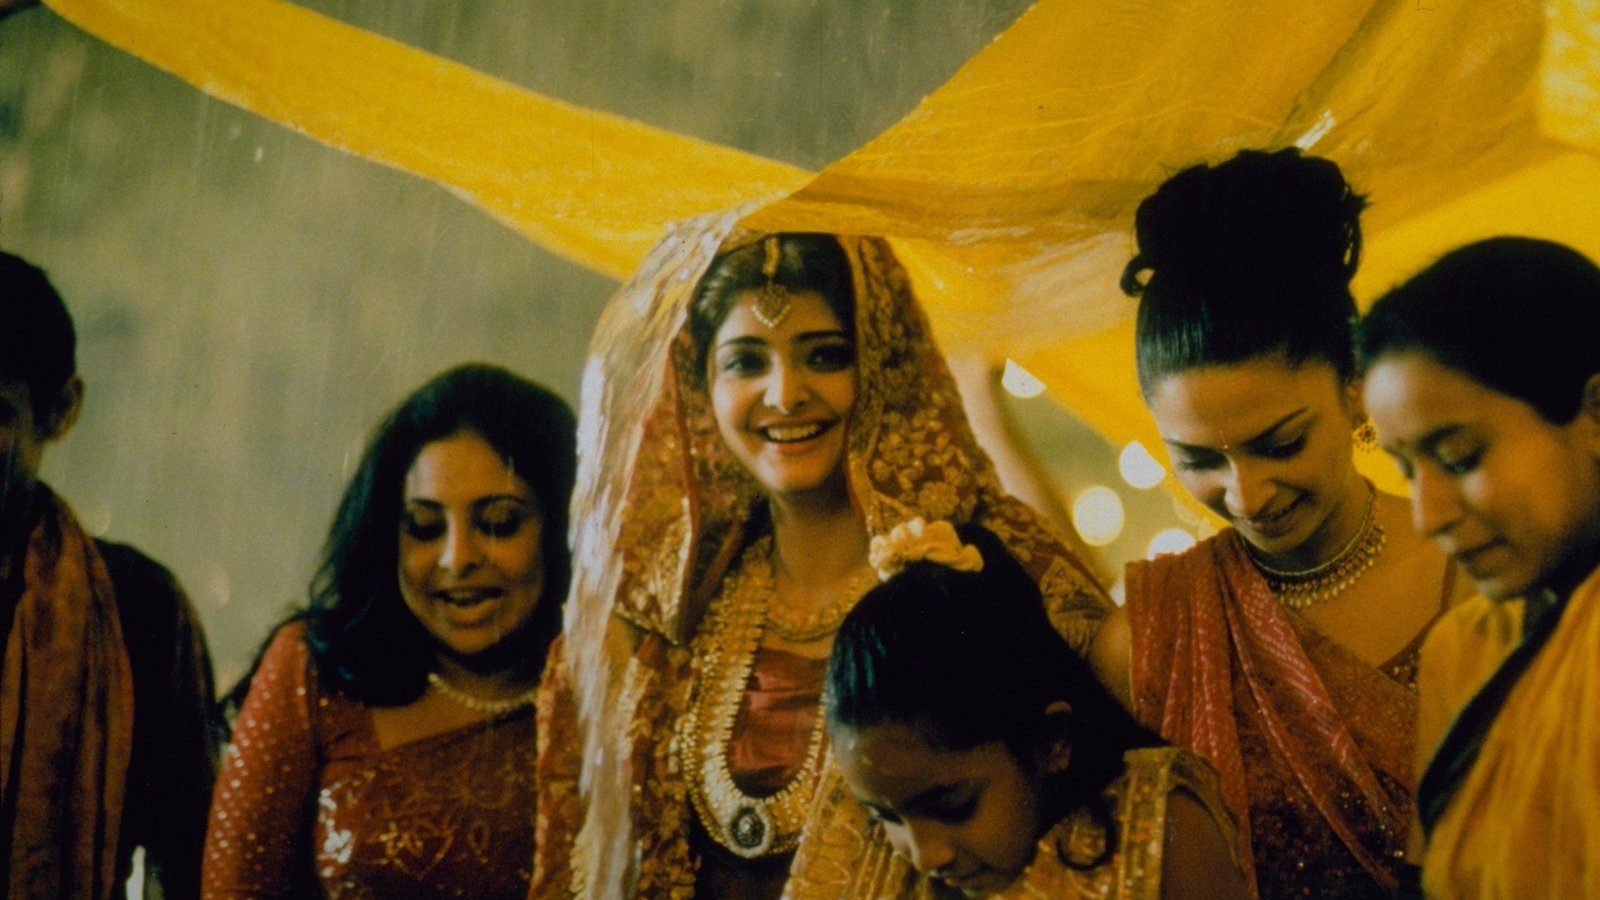 A woman smiles under a yellow canopy at a wedding